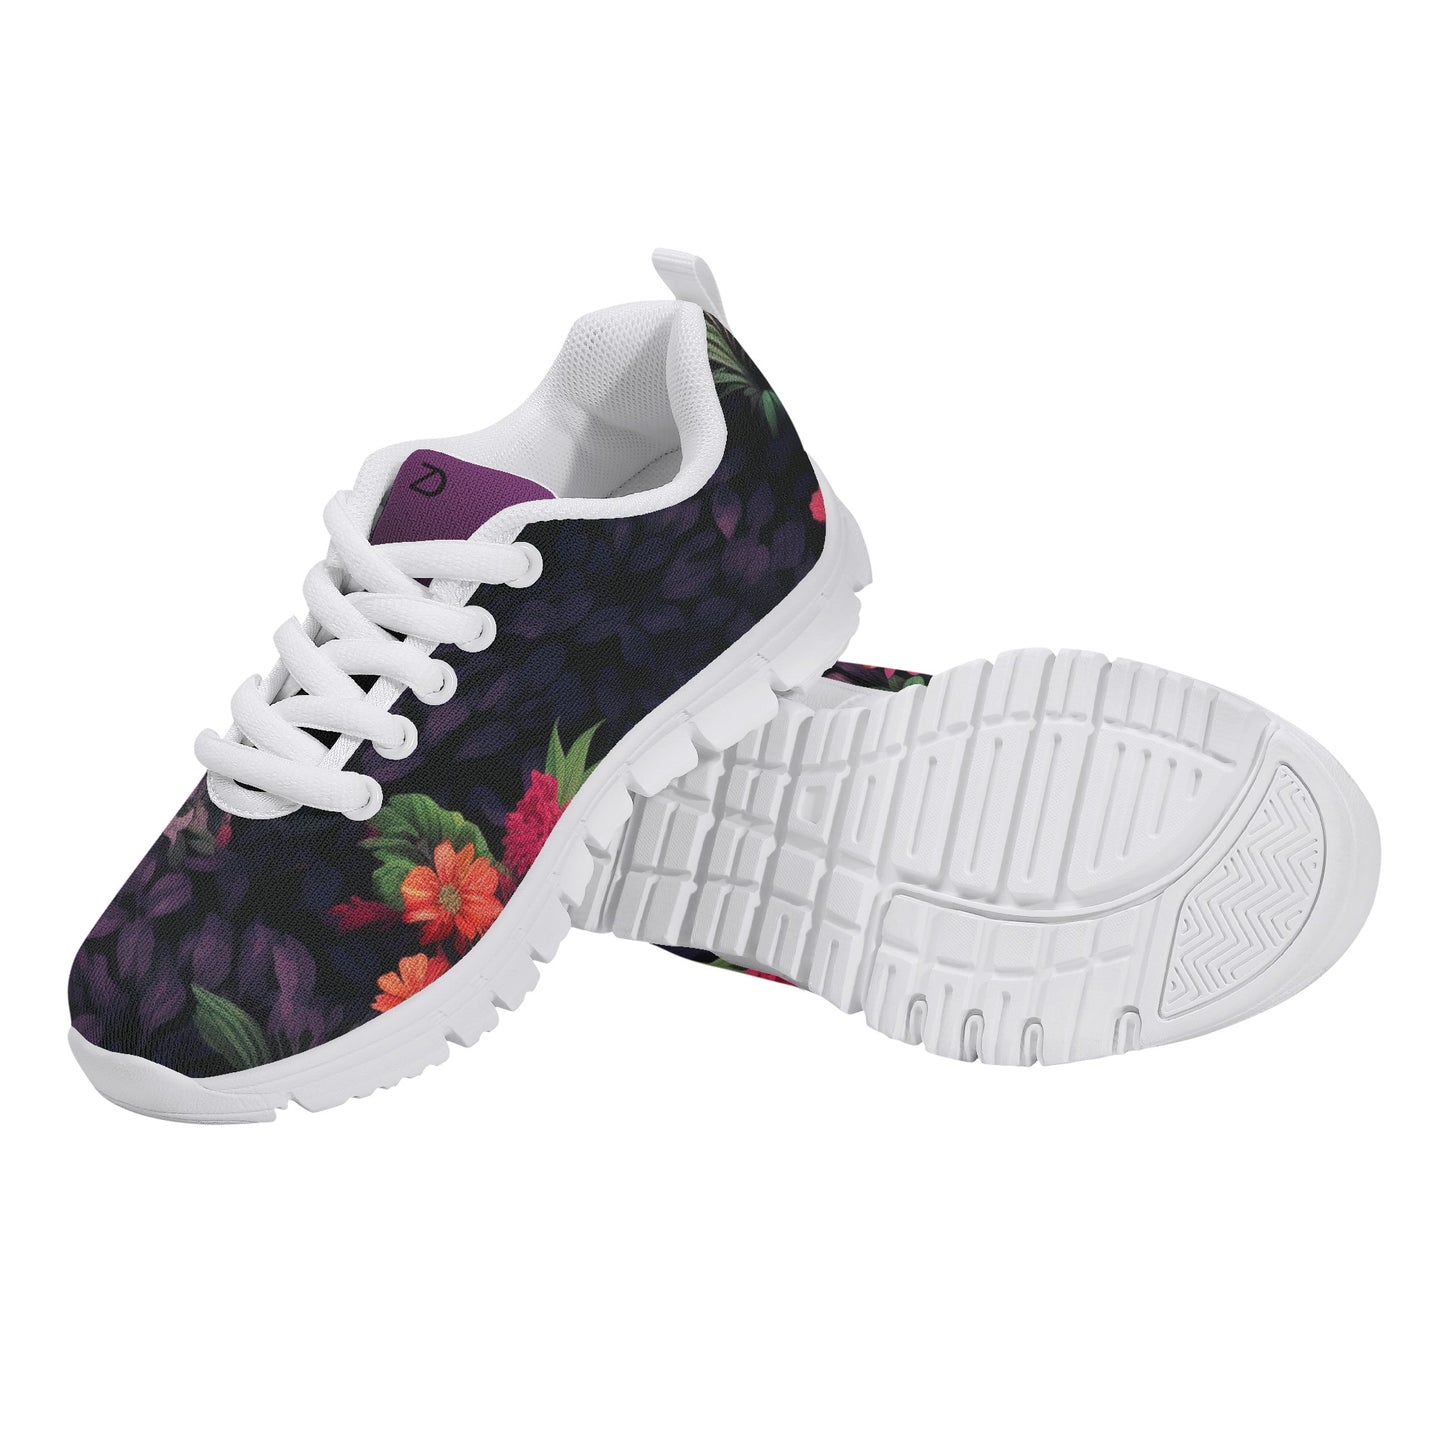 Artified Kids Floral Print Running Shoes by Neduz Designs - Lightweight and Flexible